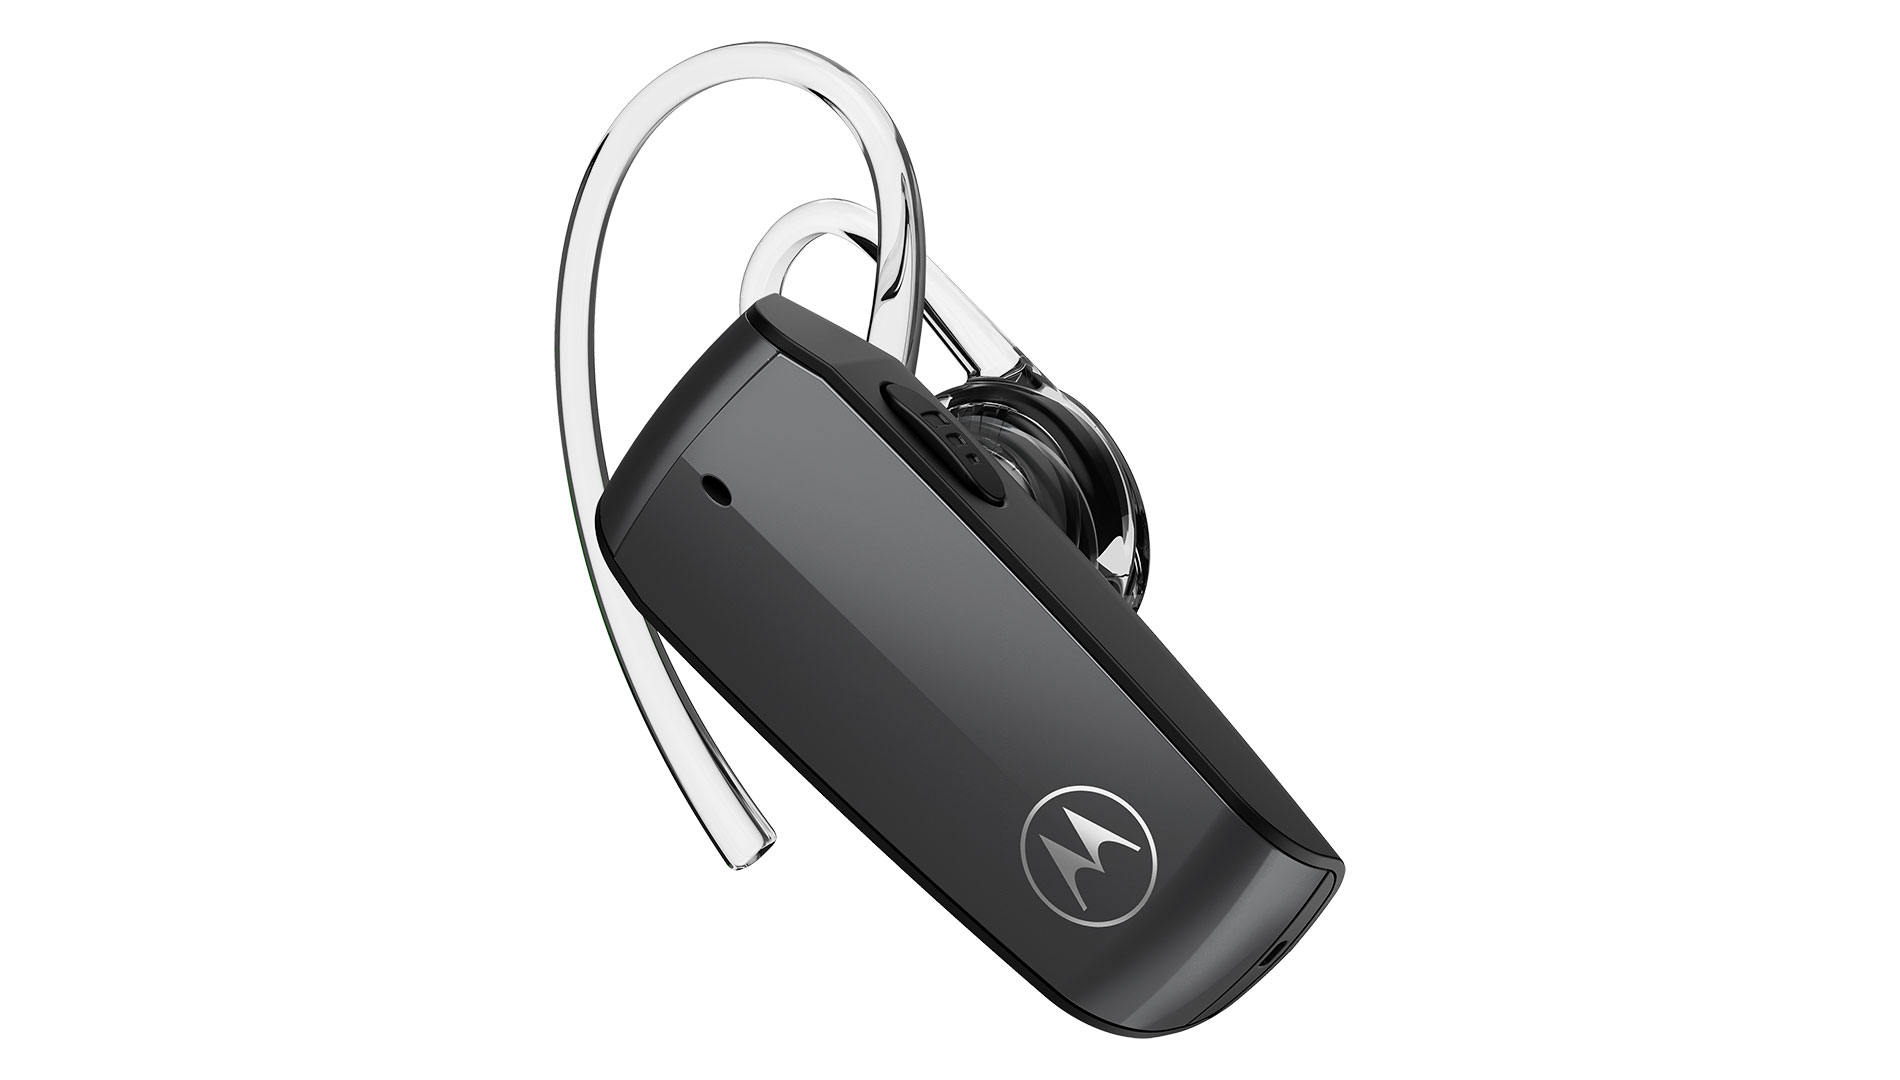 MOTO HK375-S - In-ear Wireless Mono Headset with ear-hook for secure fit - Product image